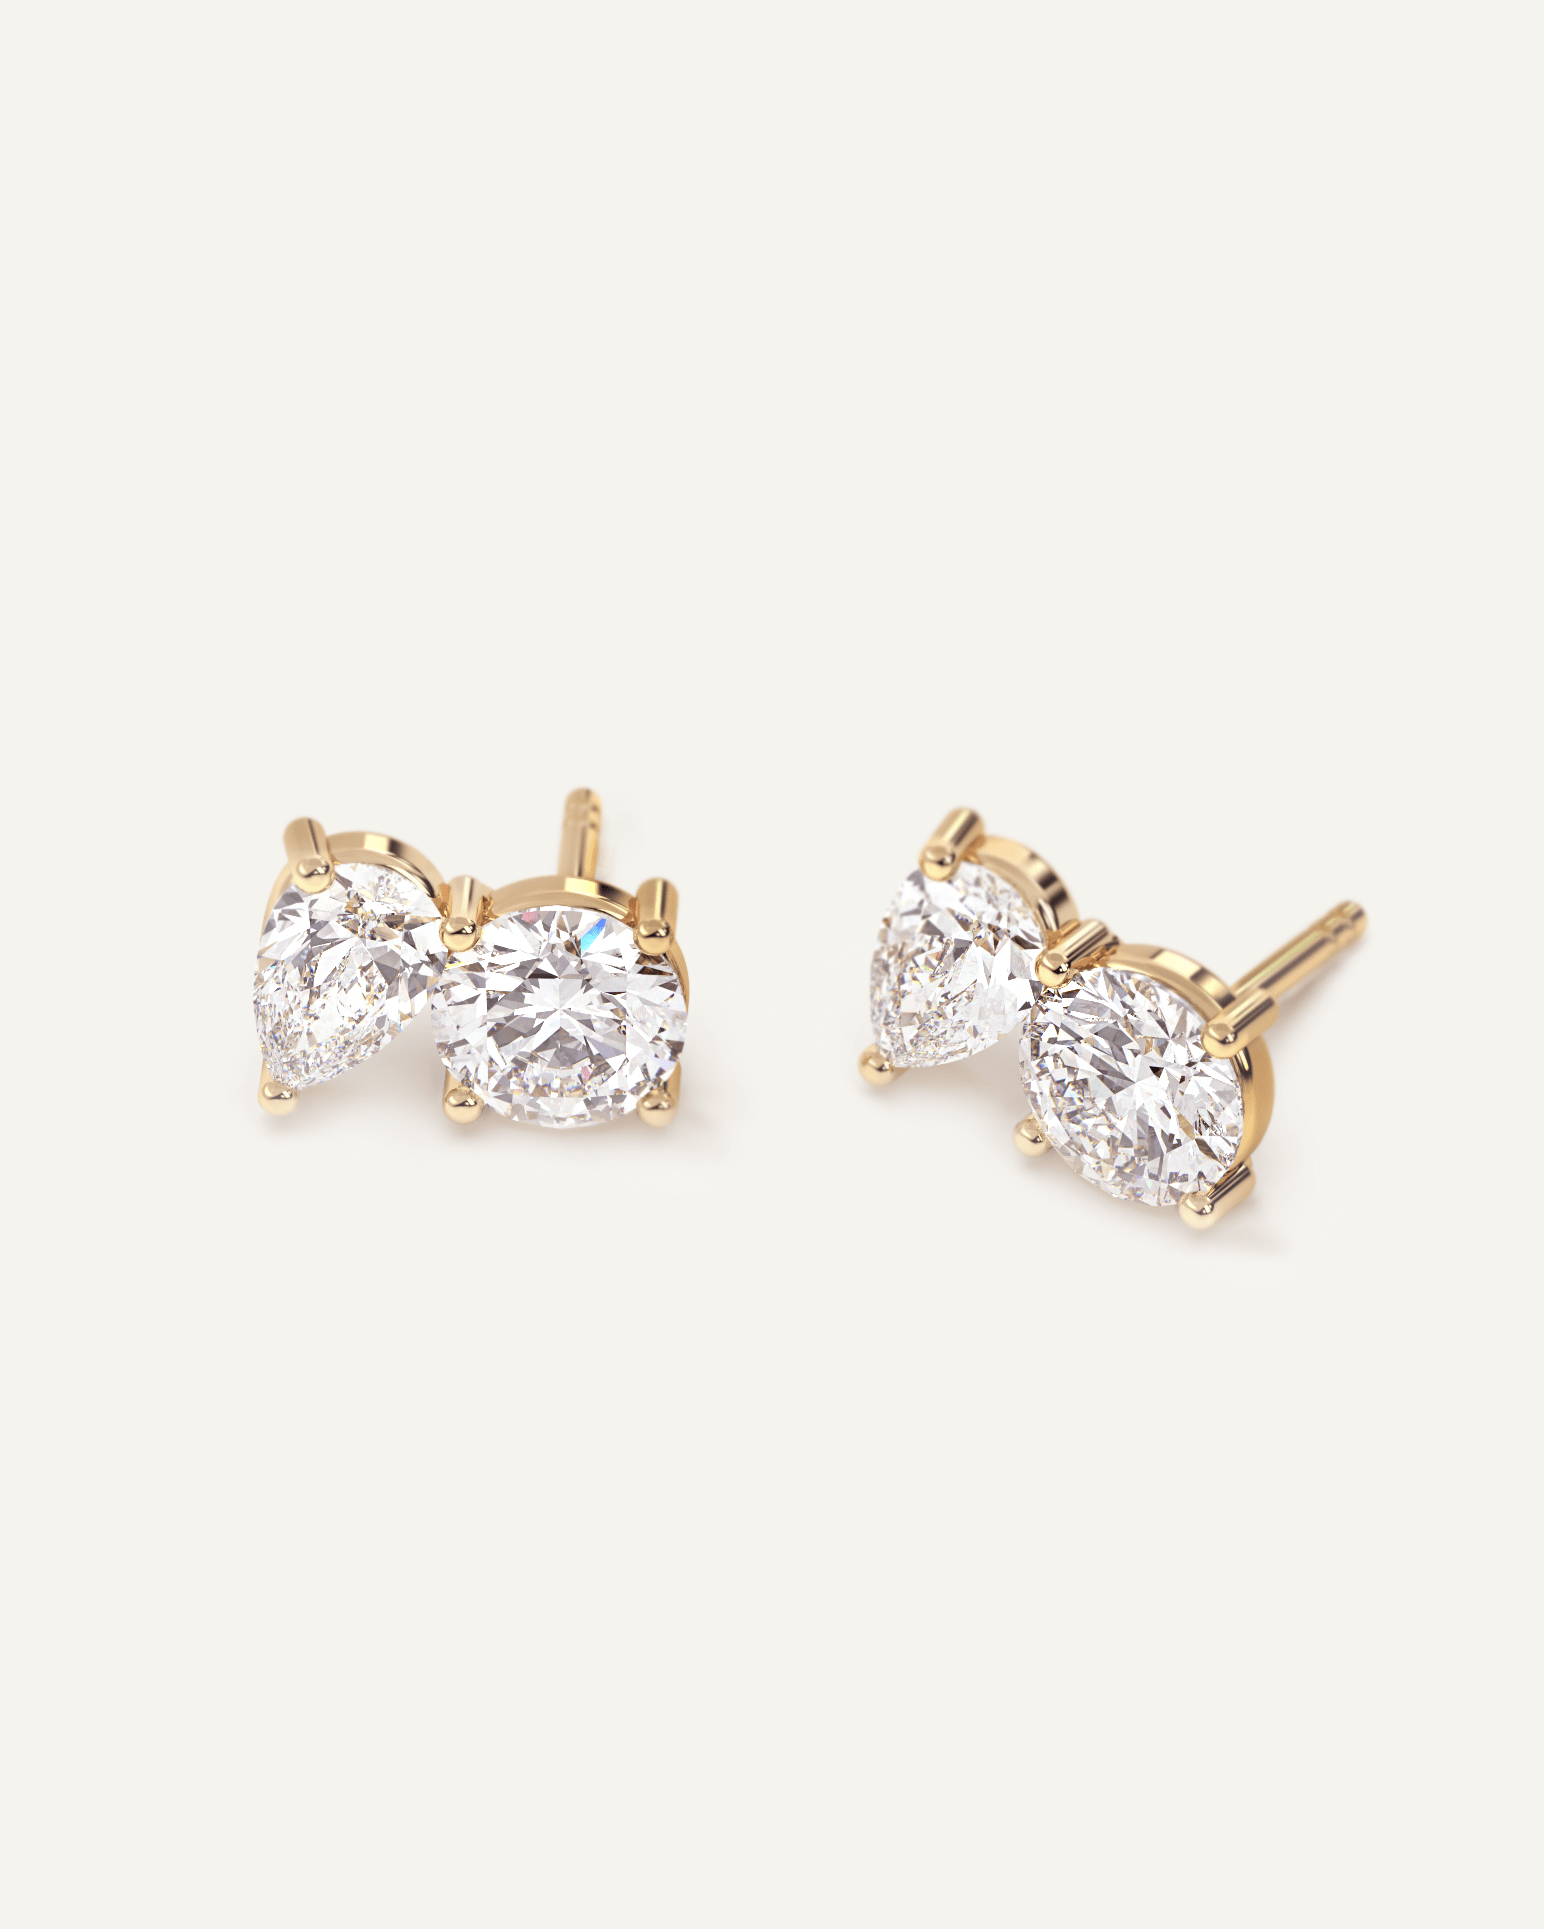 Moi Audrey Diamond and Pearl Ear Studs | Vibe with Moi